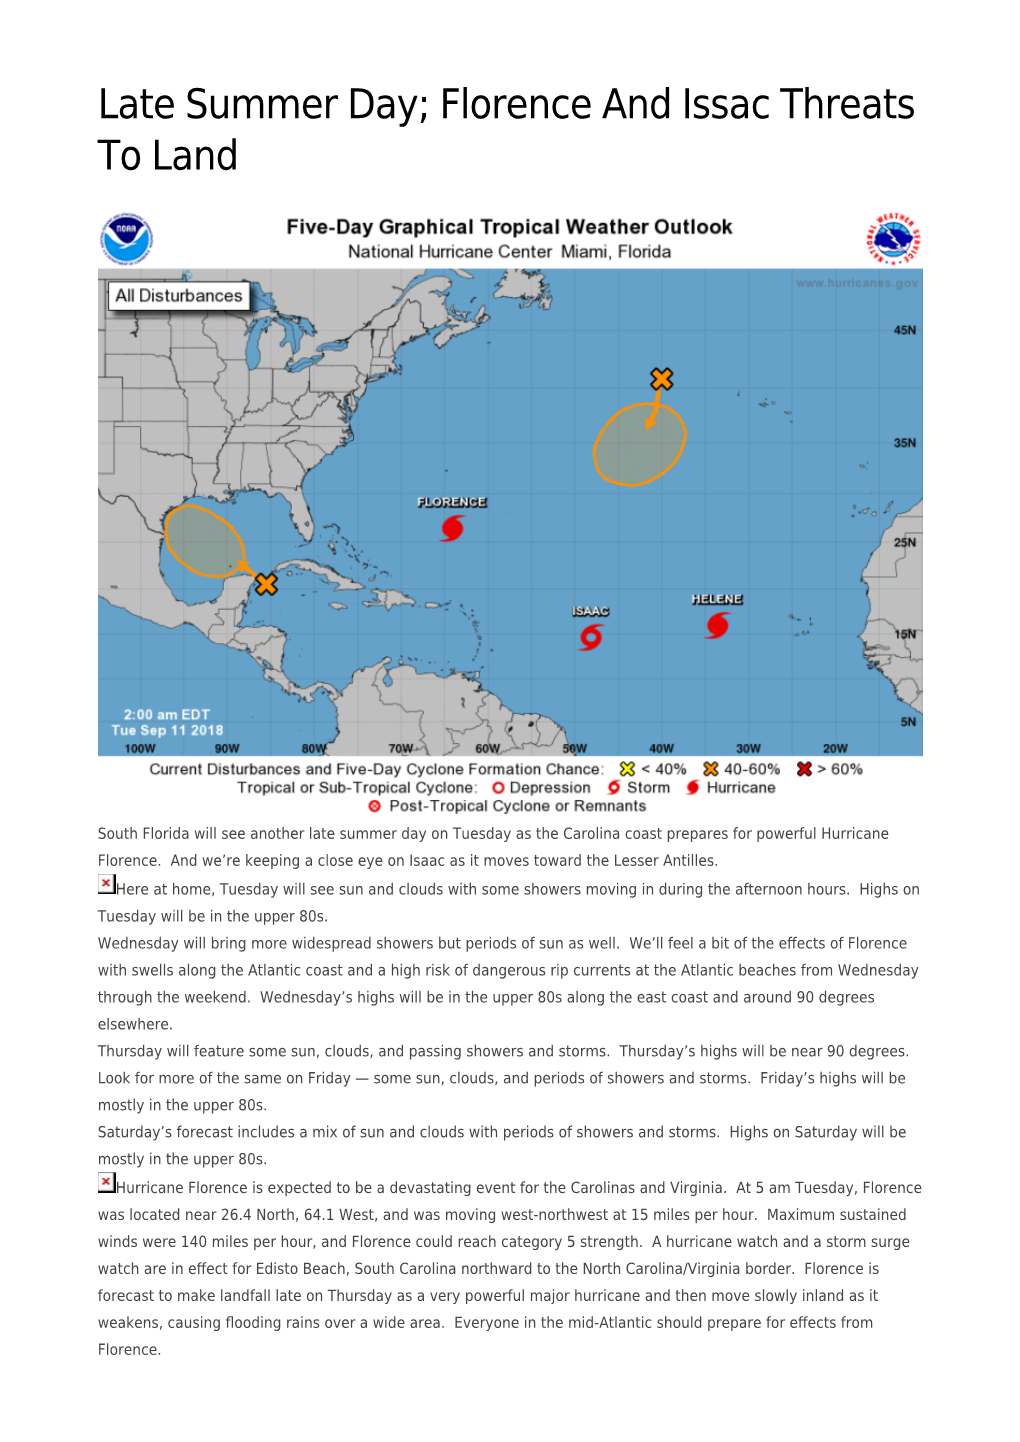 Late Summer Day; Florence and Issac Threats to Land